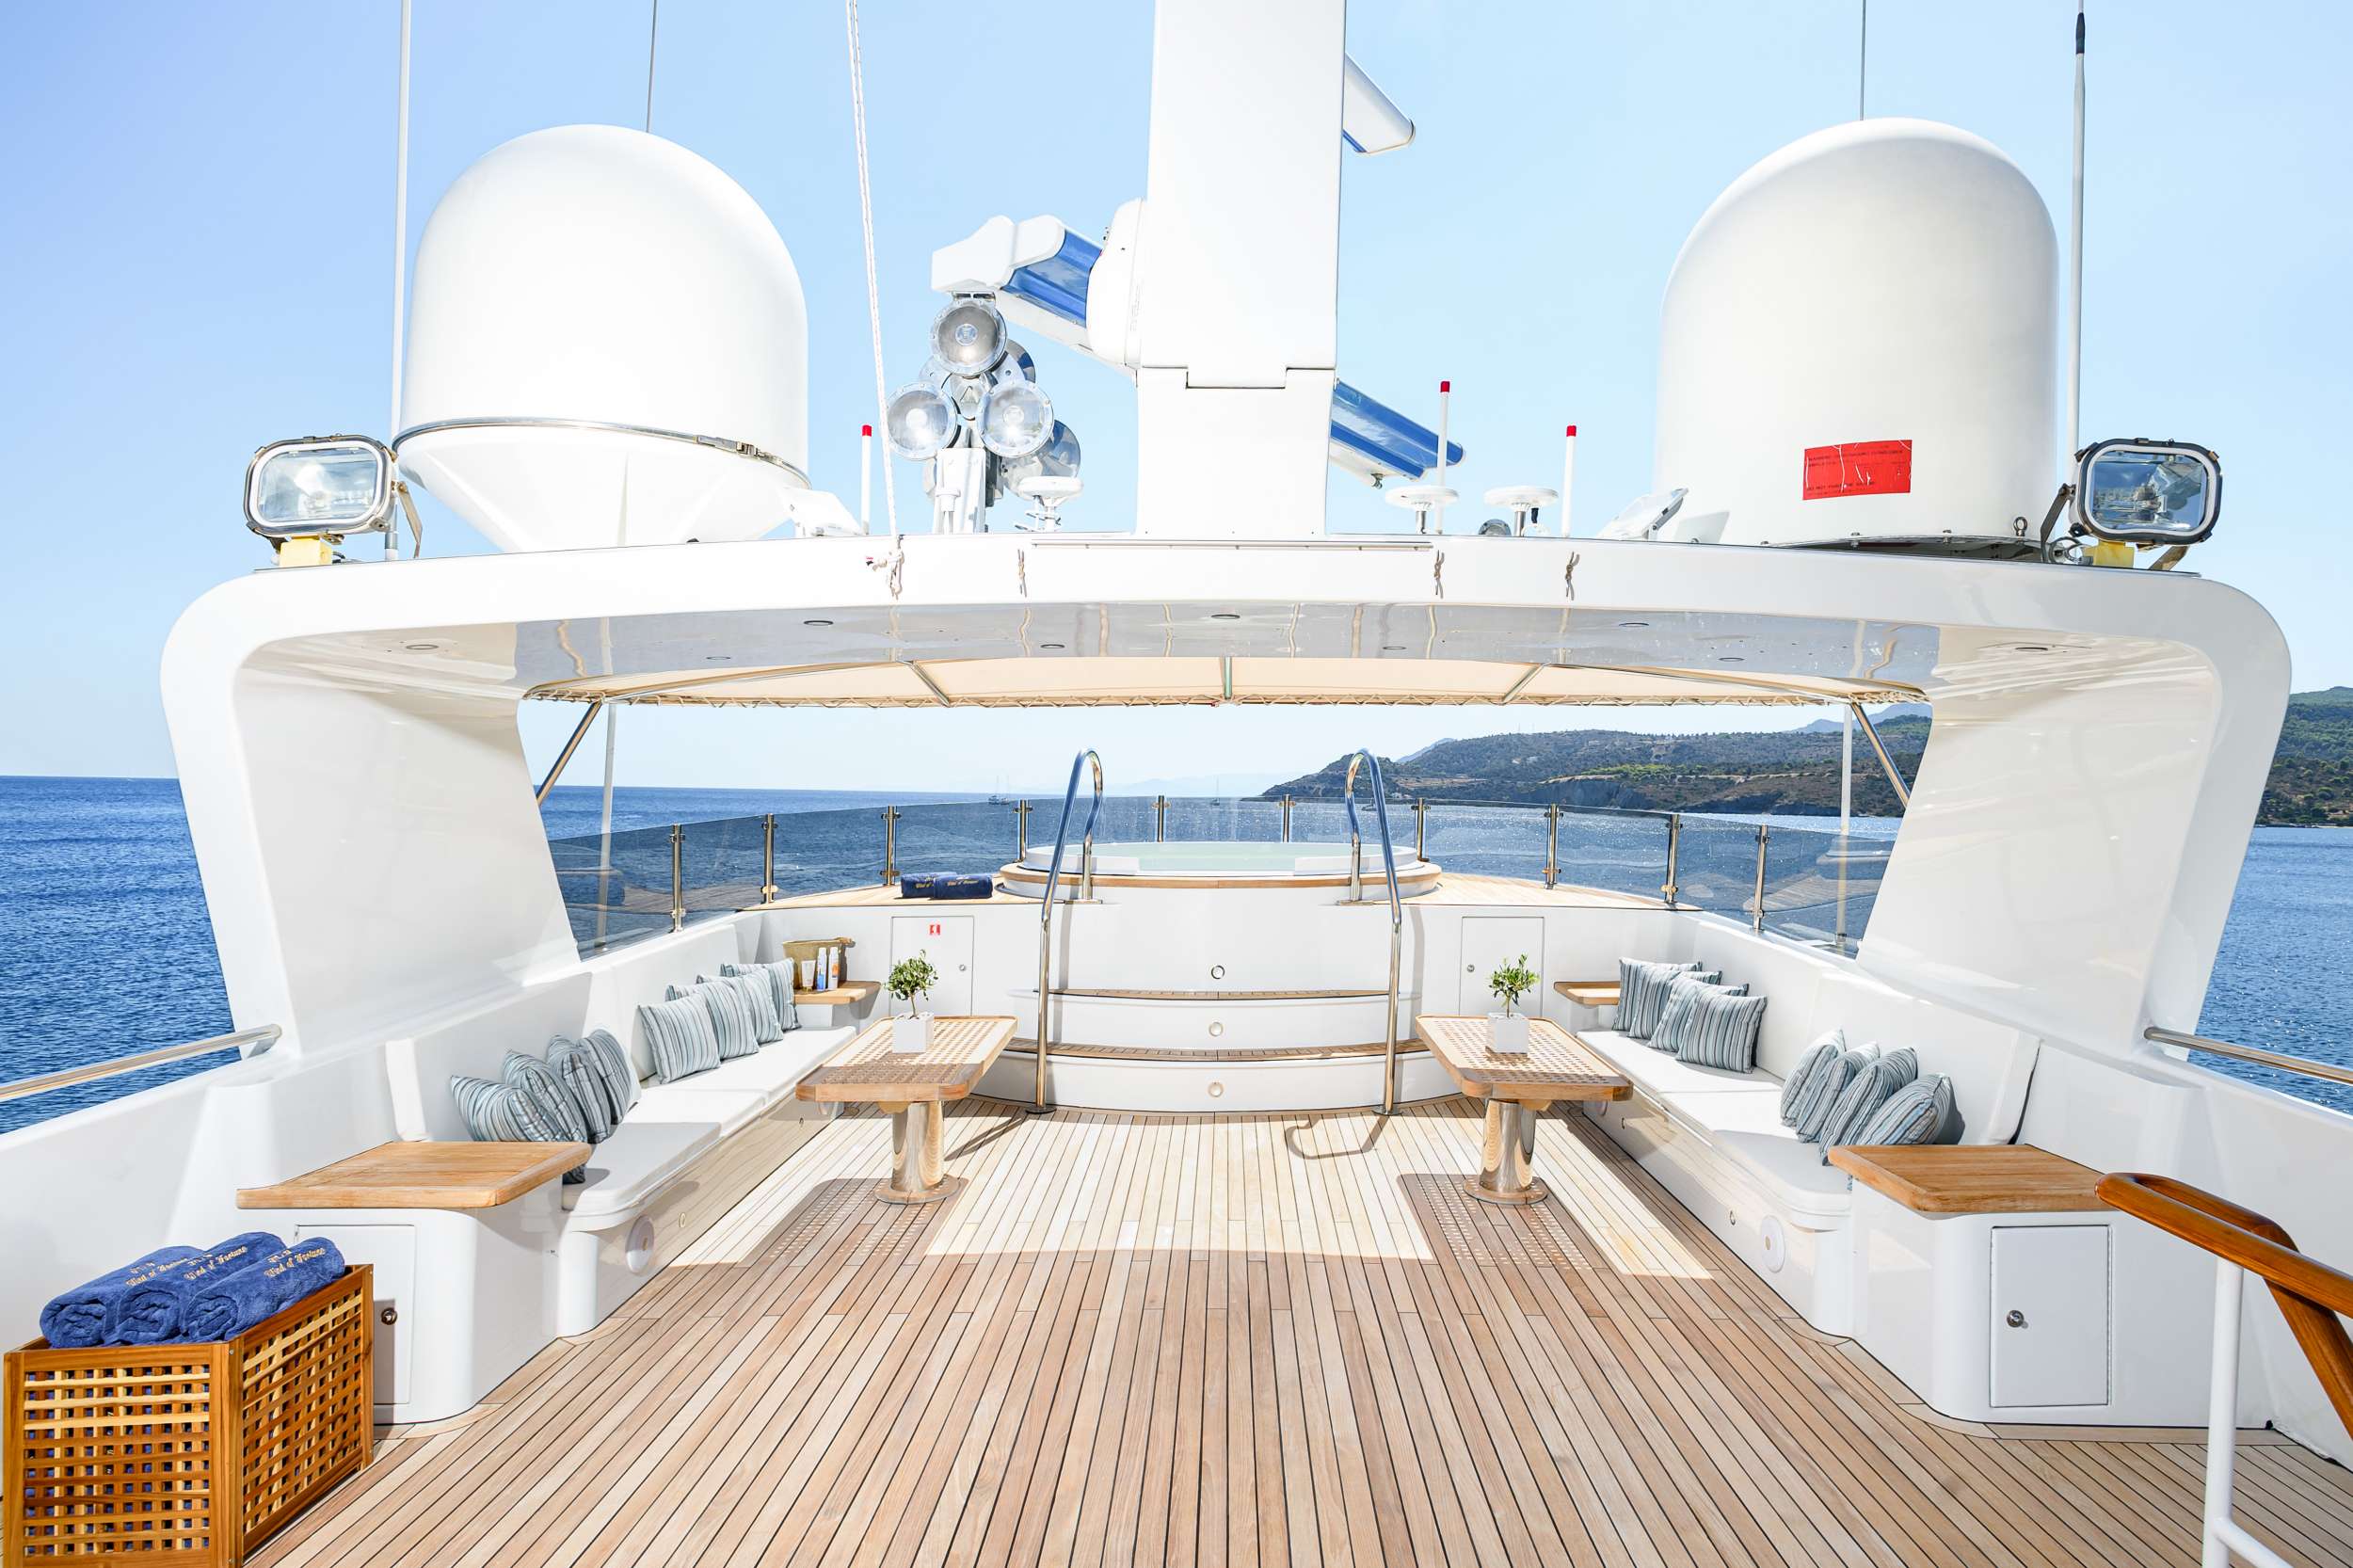 WIND OF FORTUNE - Superyacht charter Thailand & Boat hire in Summer: W. Med -Naples/Sicily, Greece, W. Med -Riviera/Cors/Sard., Turkey, W. Med - Spain/Balearics, Croatia | Winter: Indian Ocean and SE Asia, Red Sea, United Arab Emirates 5